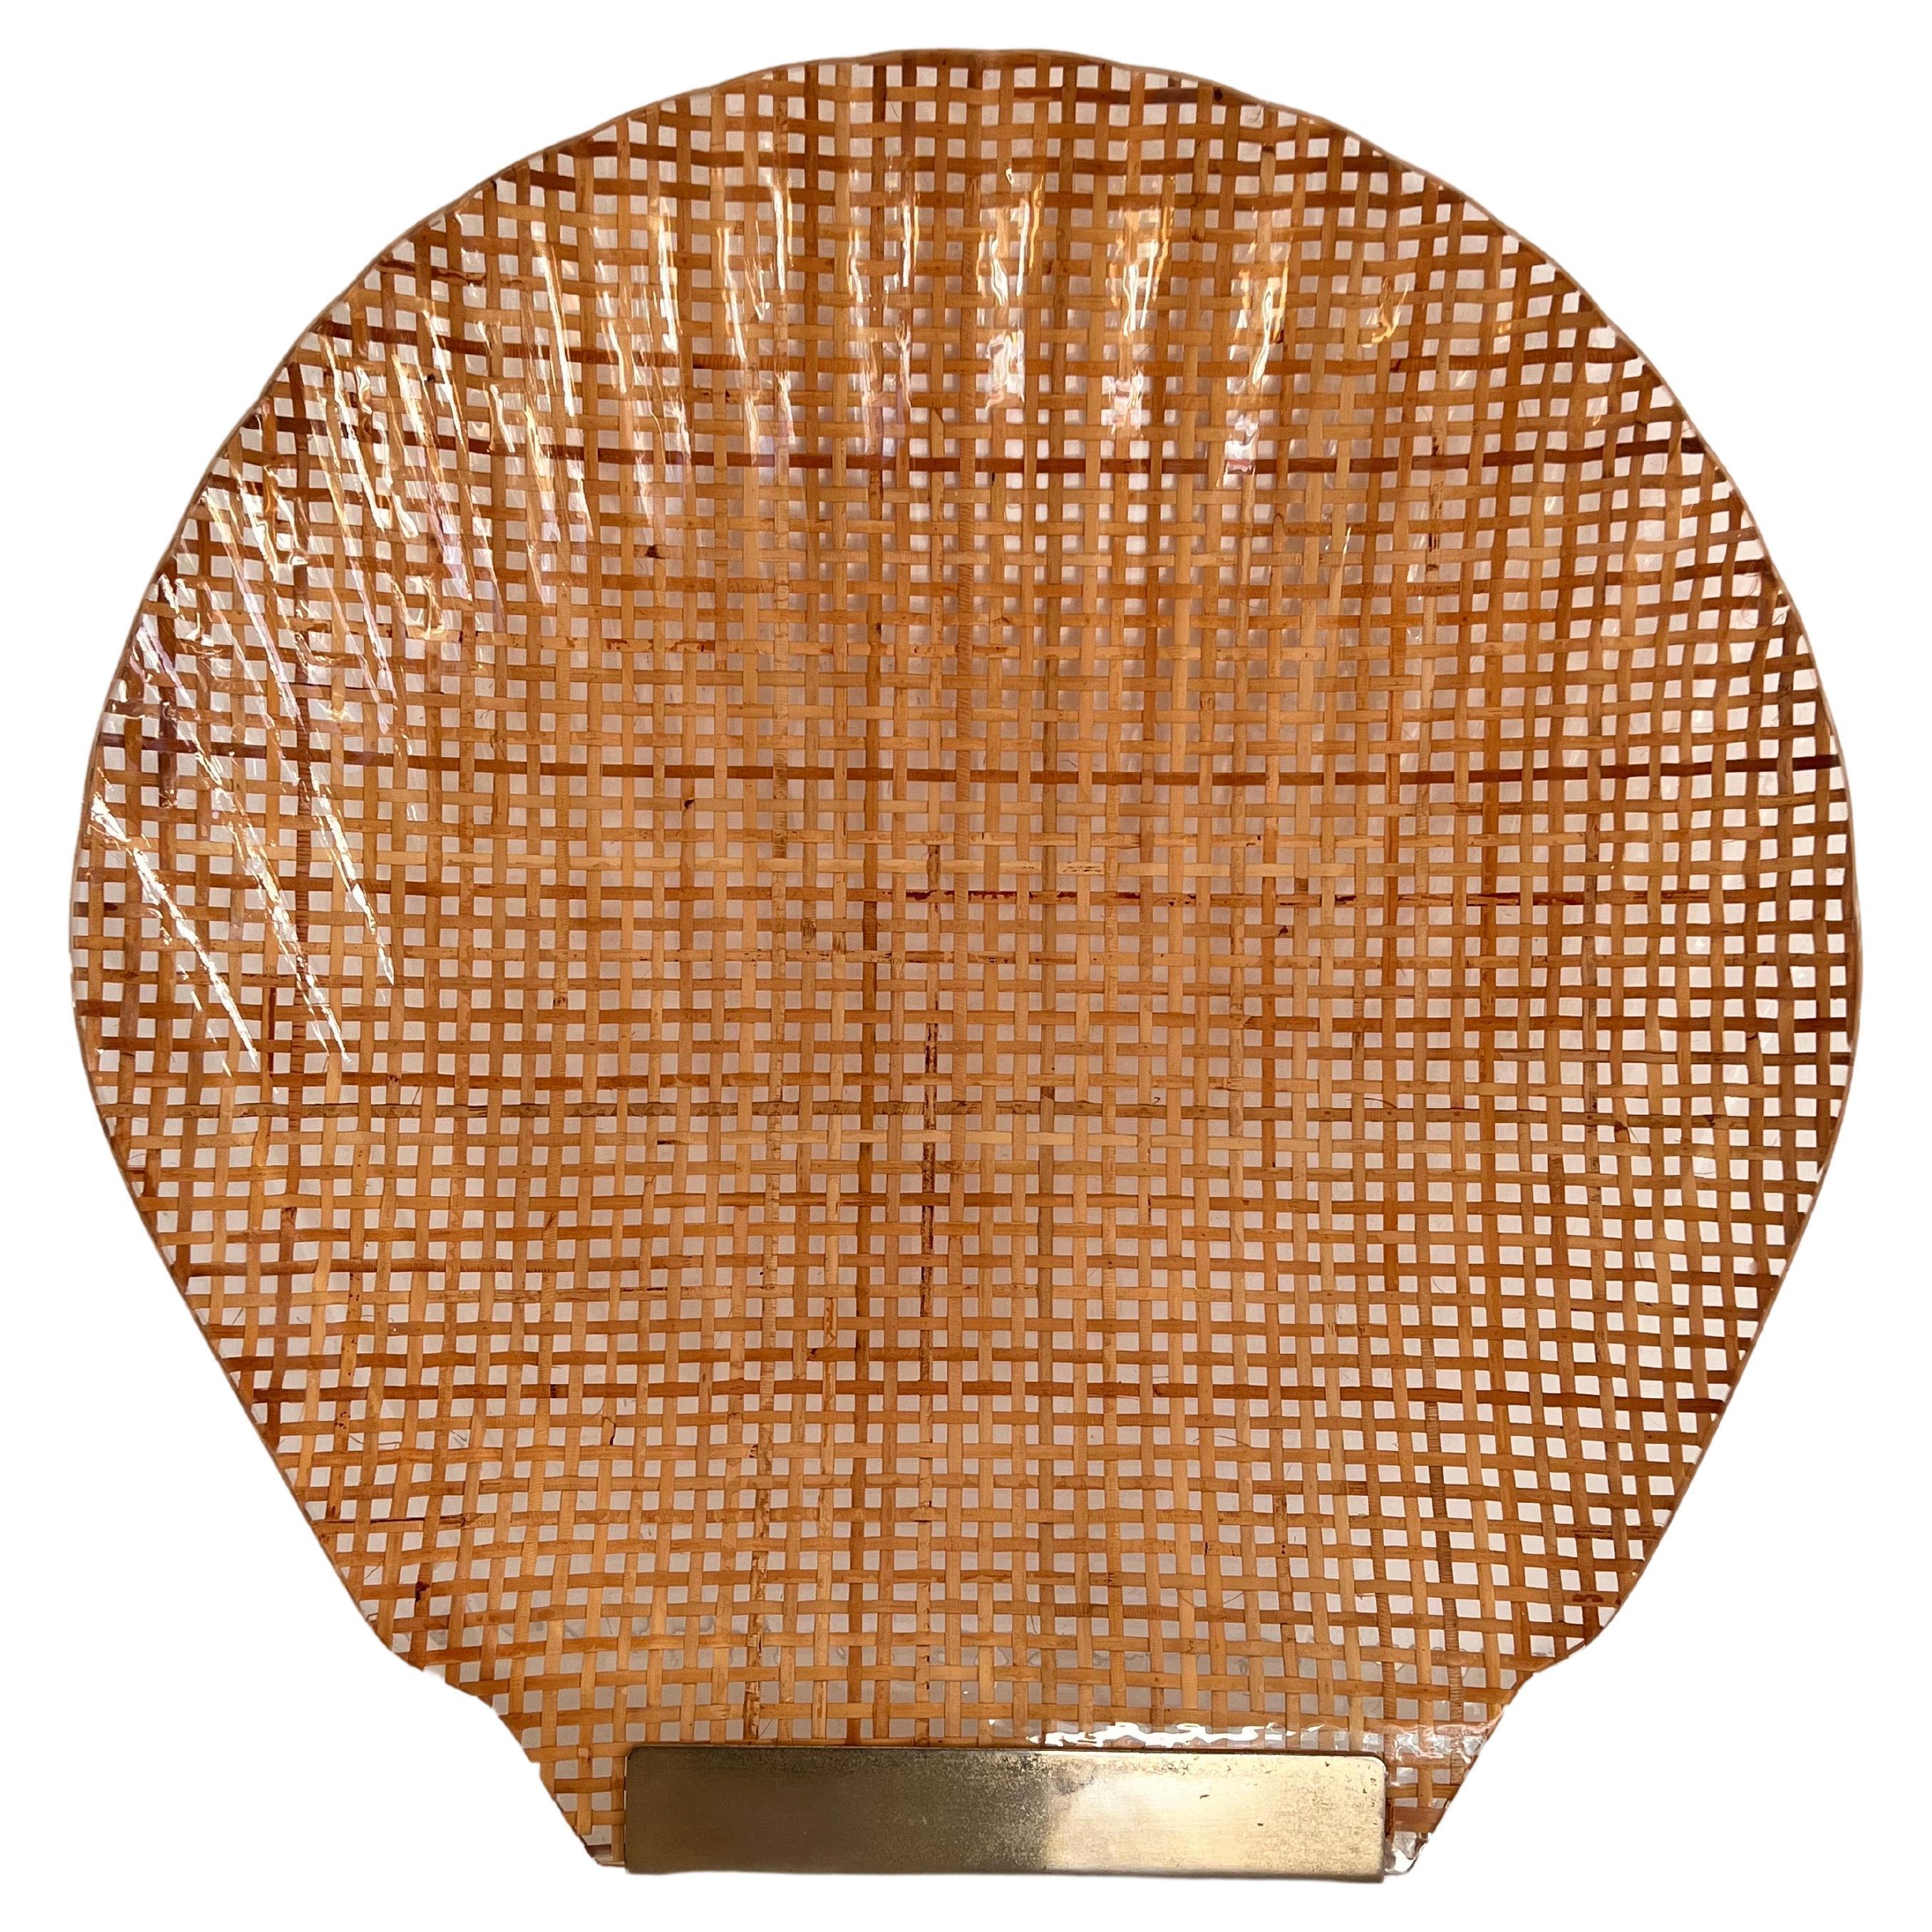 Italian MidCentury Serving Tray in Lucite, Rattan and Brass in Shell Shape, 1970